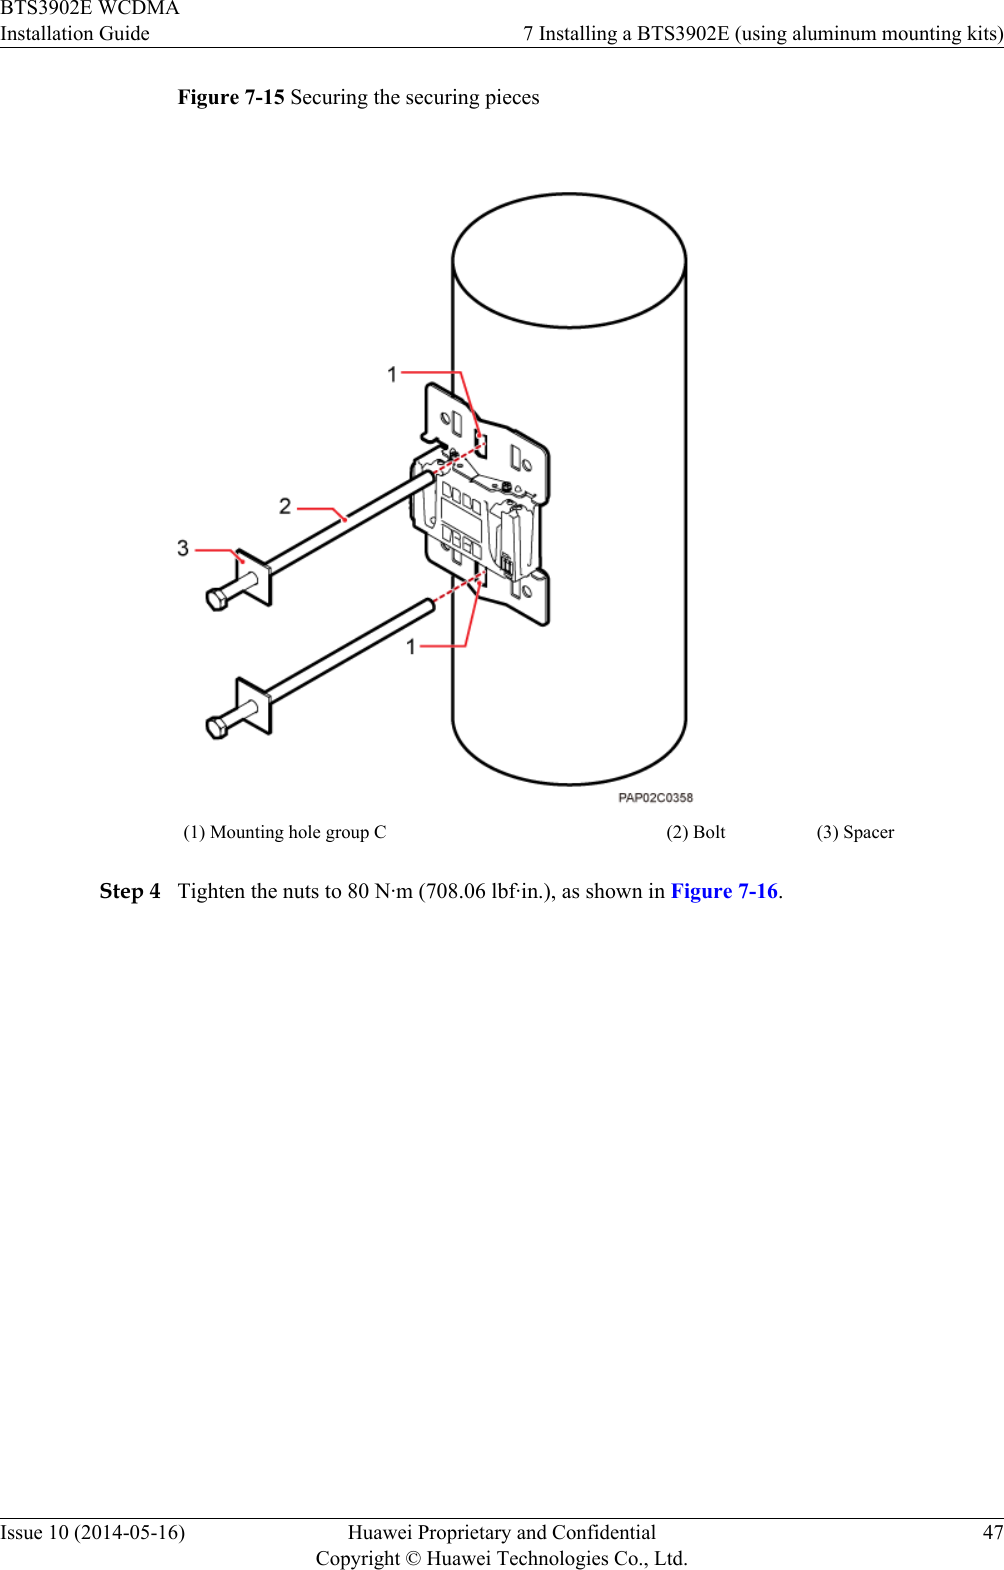 Figure 7-15 Securing the securing pieces(1) Mounting hole group C (2) Bolt (3) SpacerStep 4 Tighten the nuts to 80 N·m (708.06 lbf·in.), as shown in Figure 7-16.BTS3902E WCDMAInstallation Guide 7 Installing a BTS3902E (using aluminum mounting kits)Issue 10 (2014-05-16) Huawei Proprietary and ConfidentialCopyright © Huawei Technologies Co., Ltd.47